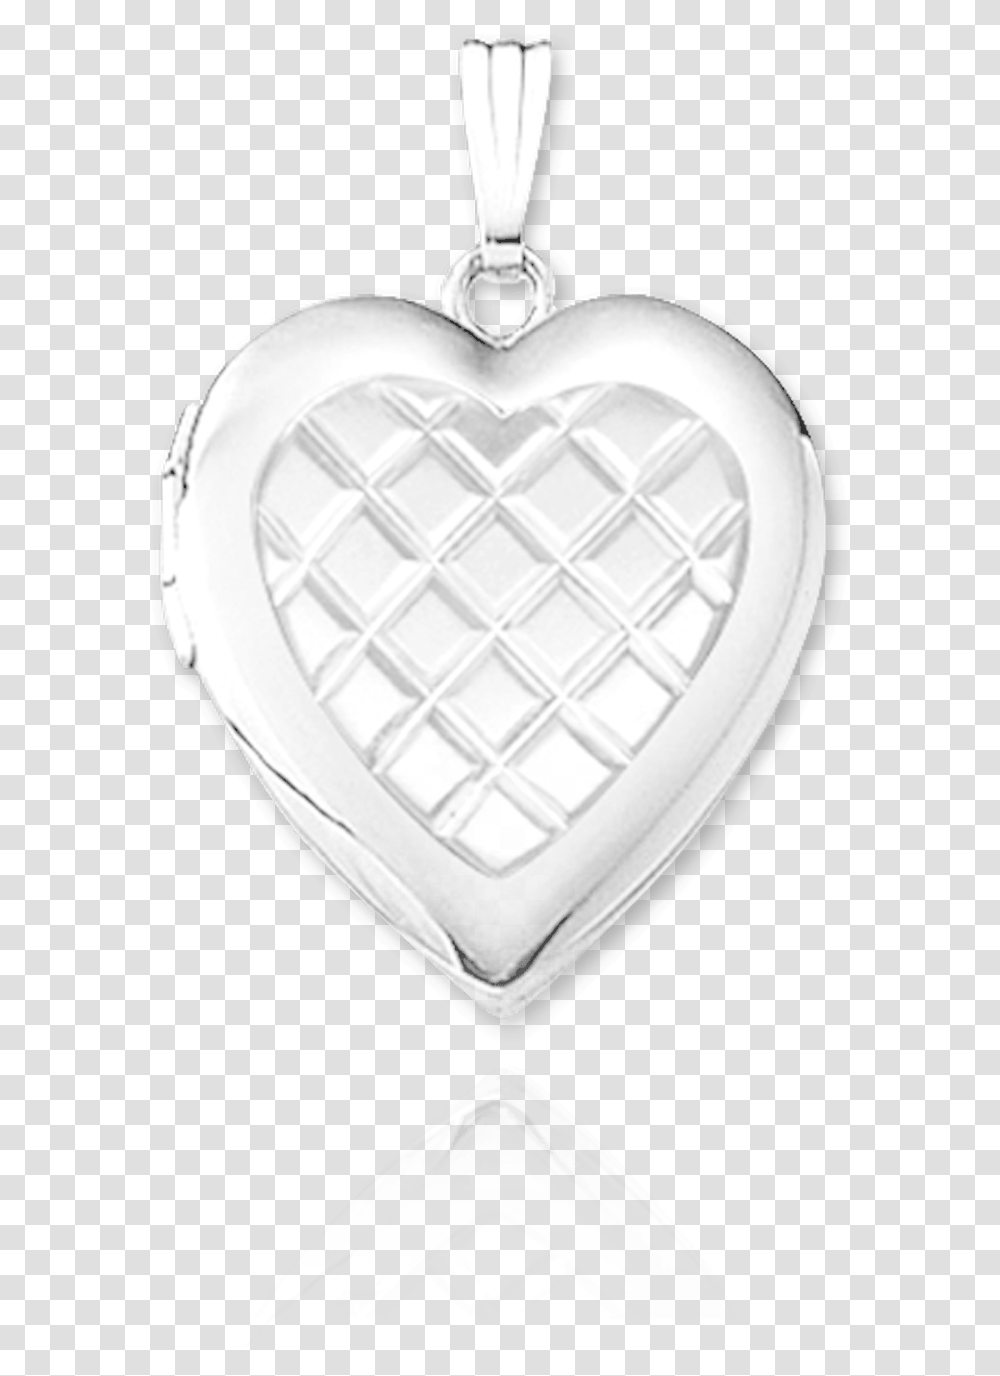 Heart Shaped Locket With Quilted Design Locket, Pendant, Jewelry, Accessories, Accessory Transparent Png